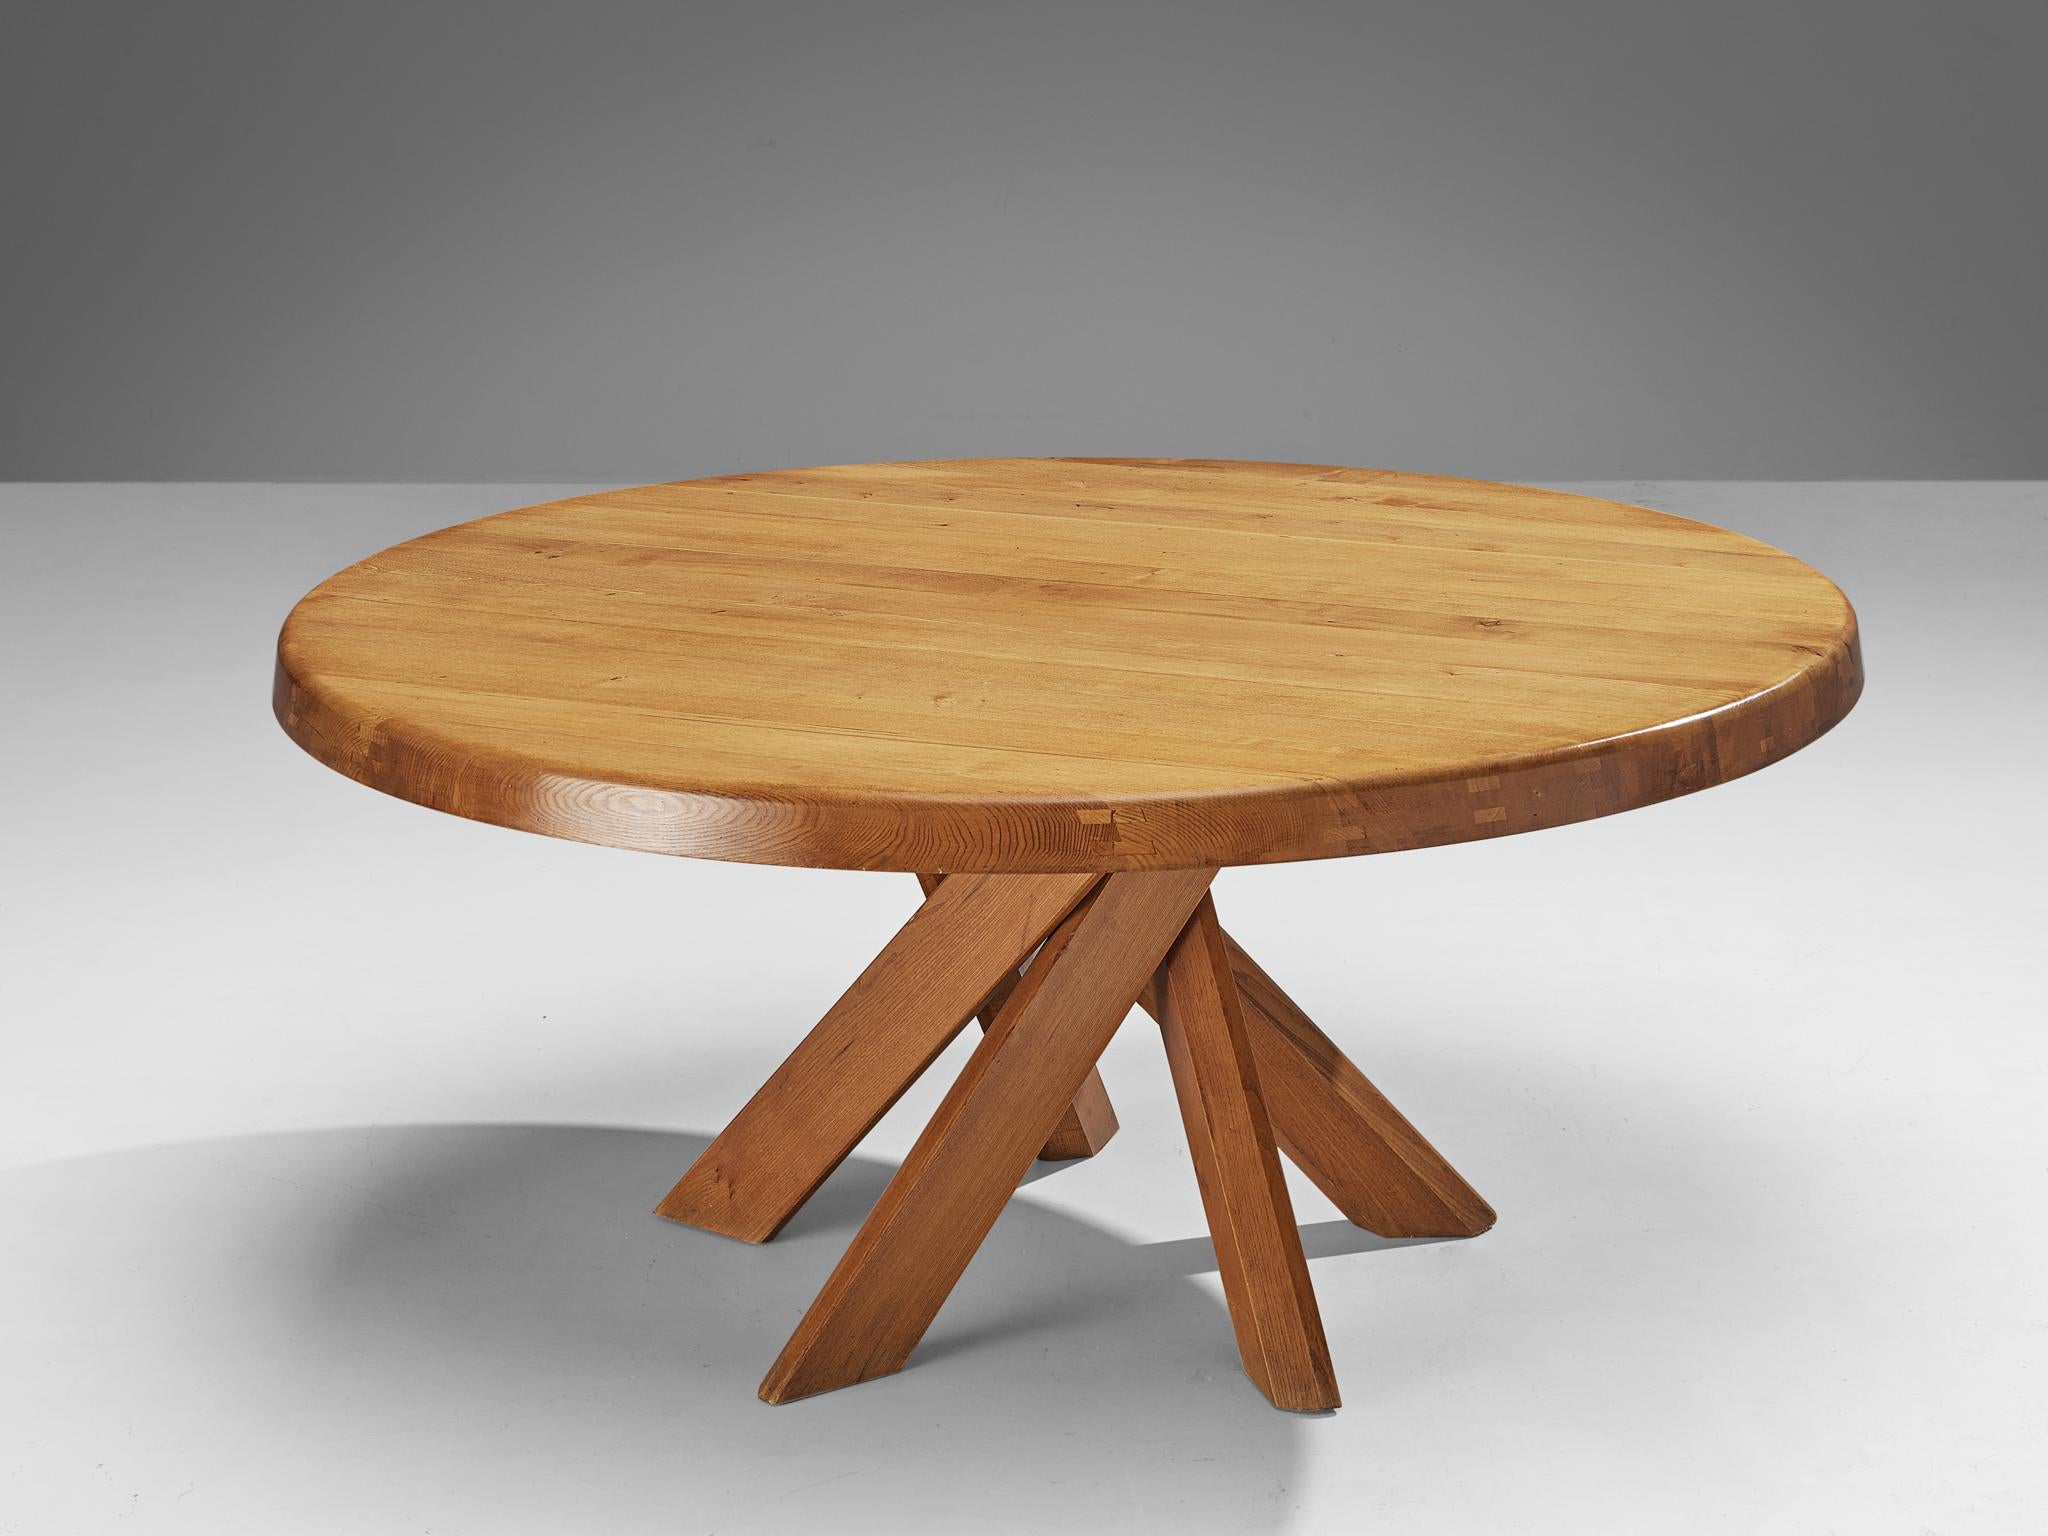 Pierre Chapo, 'Sfax' dining table, model 'T21E', elm, France, circa 1973

This design is an early edition, created according to the original craft methodology of Pierre Chapo. The round 'T21E' dining table has a diameter of 160 cm (63 in). The